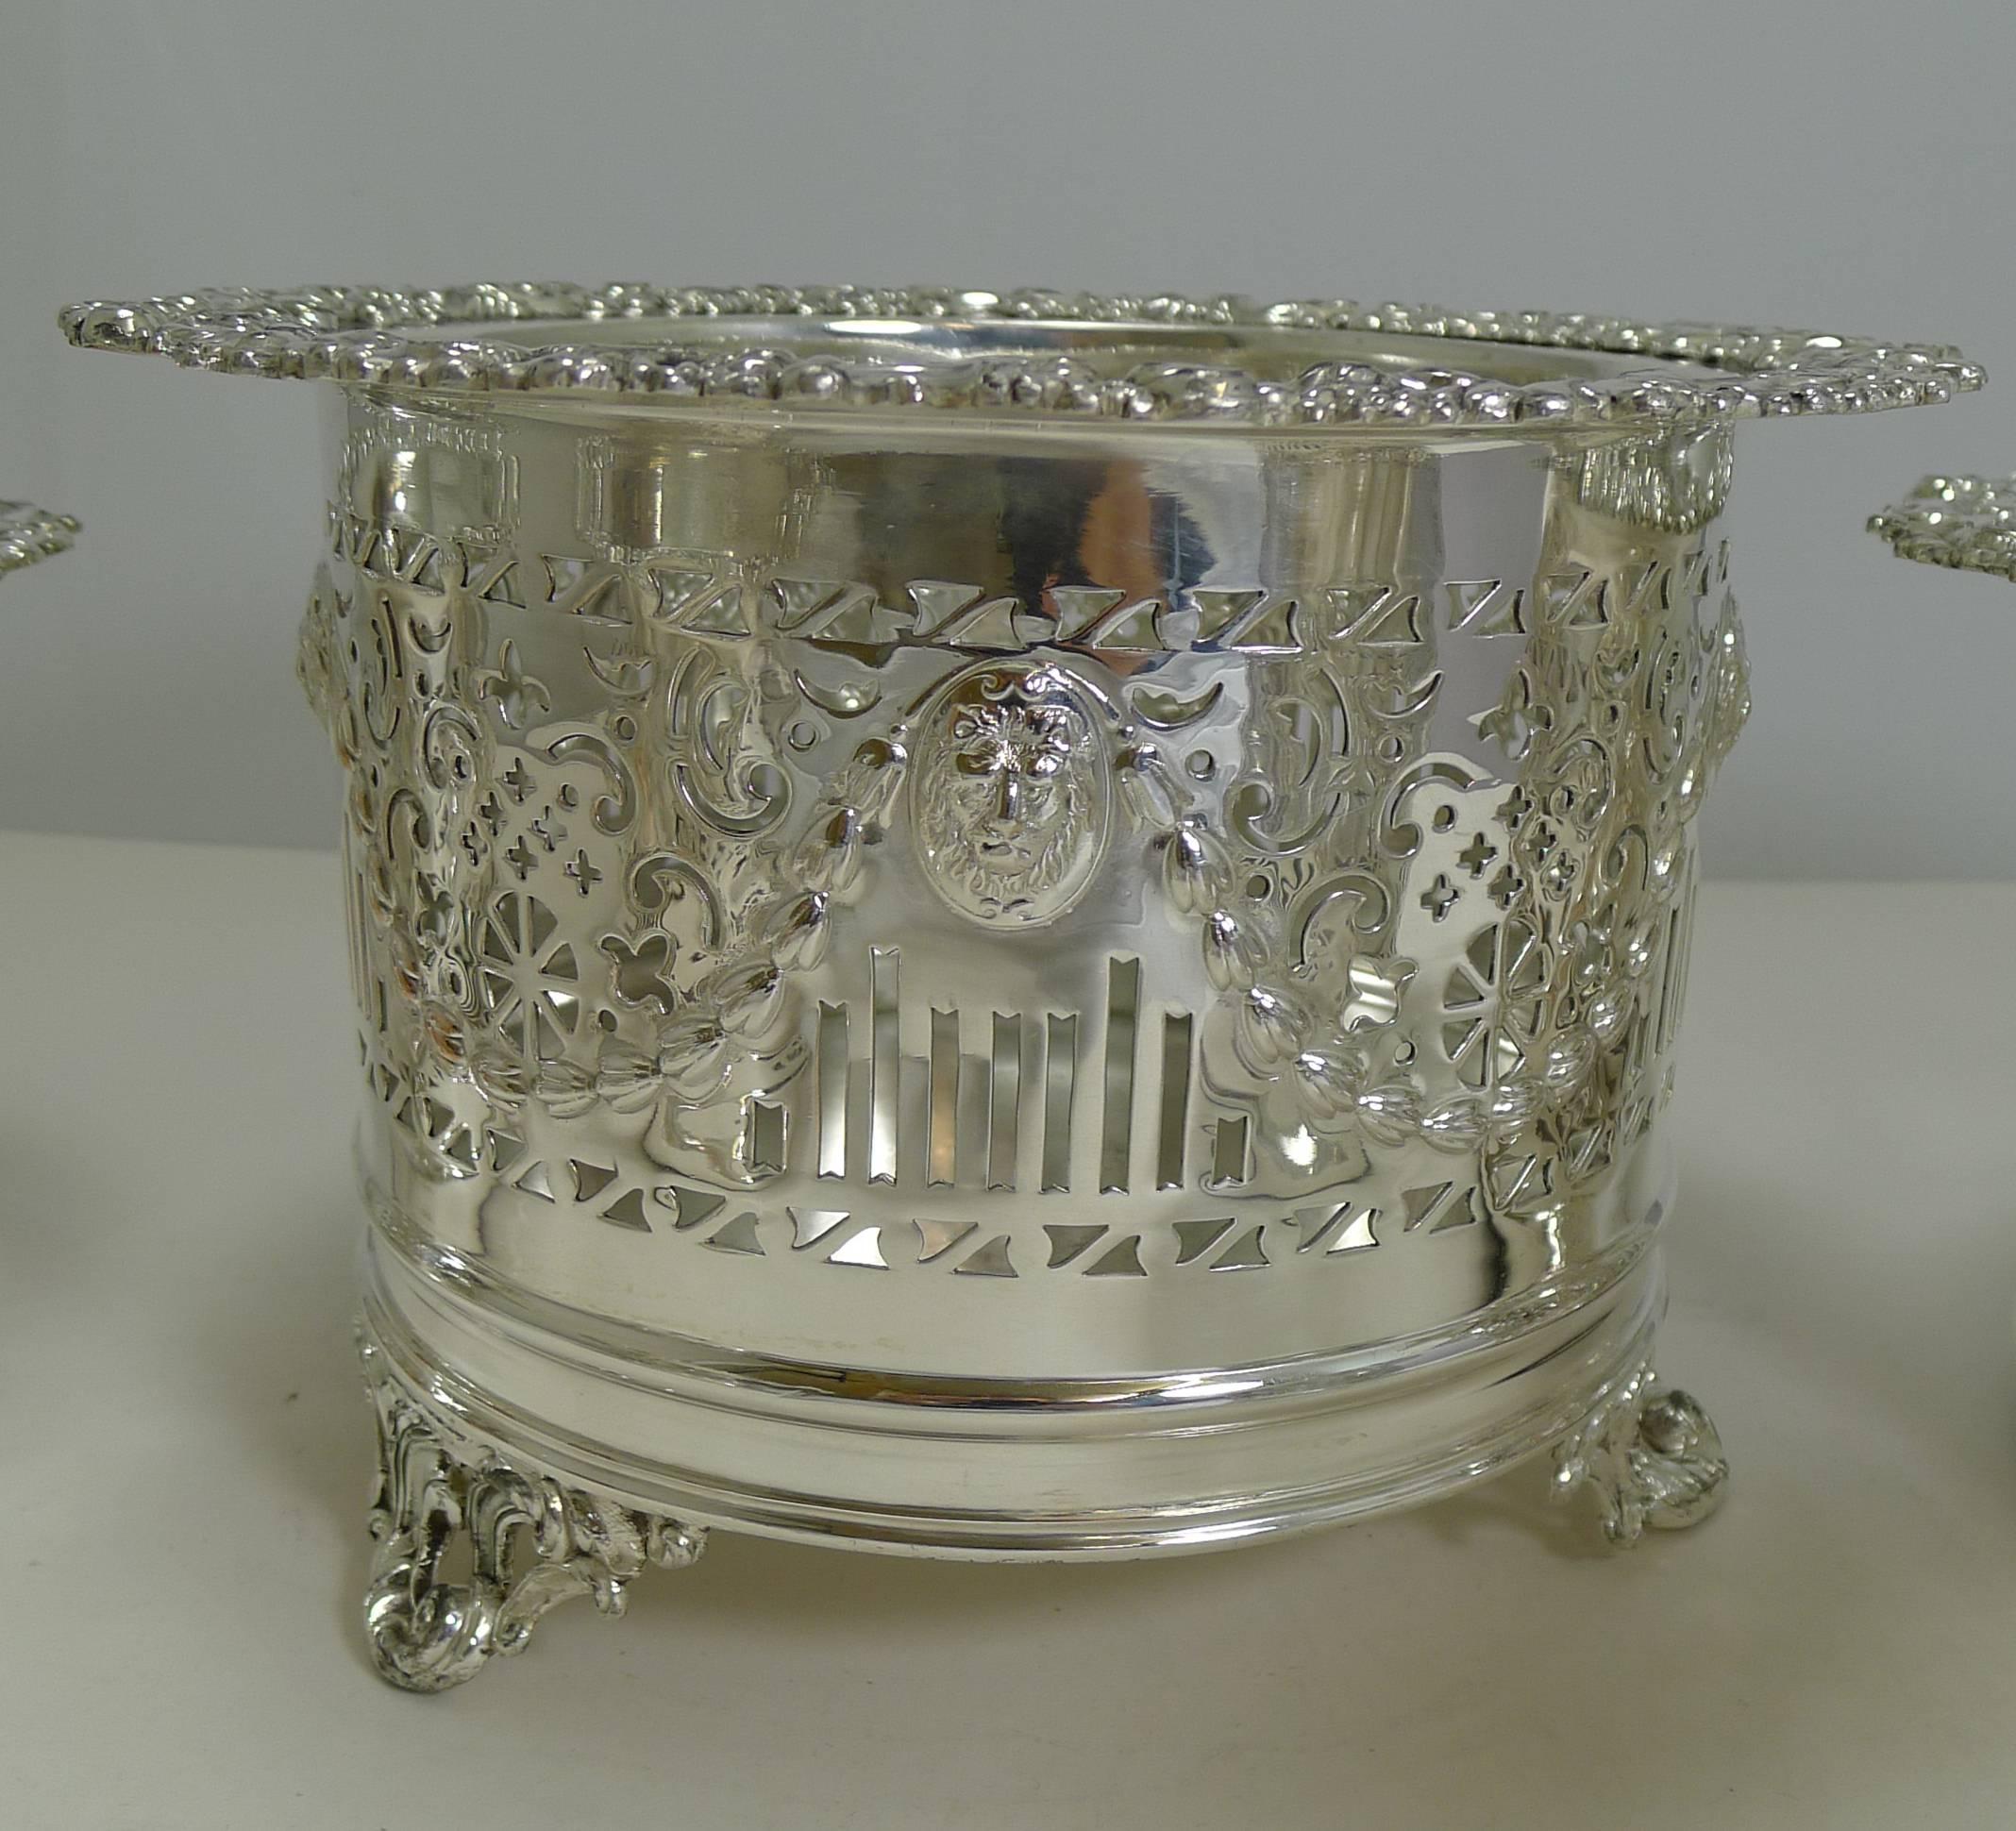 Edwardian Suite Five Antique English Silver Plated Wine / Champagne Coasters or Holders C